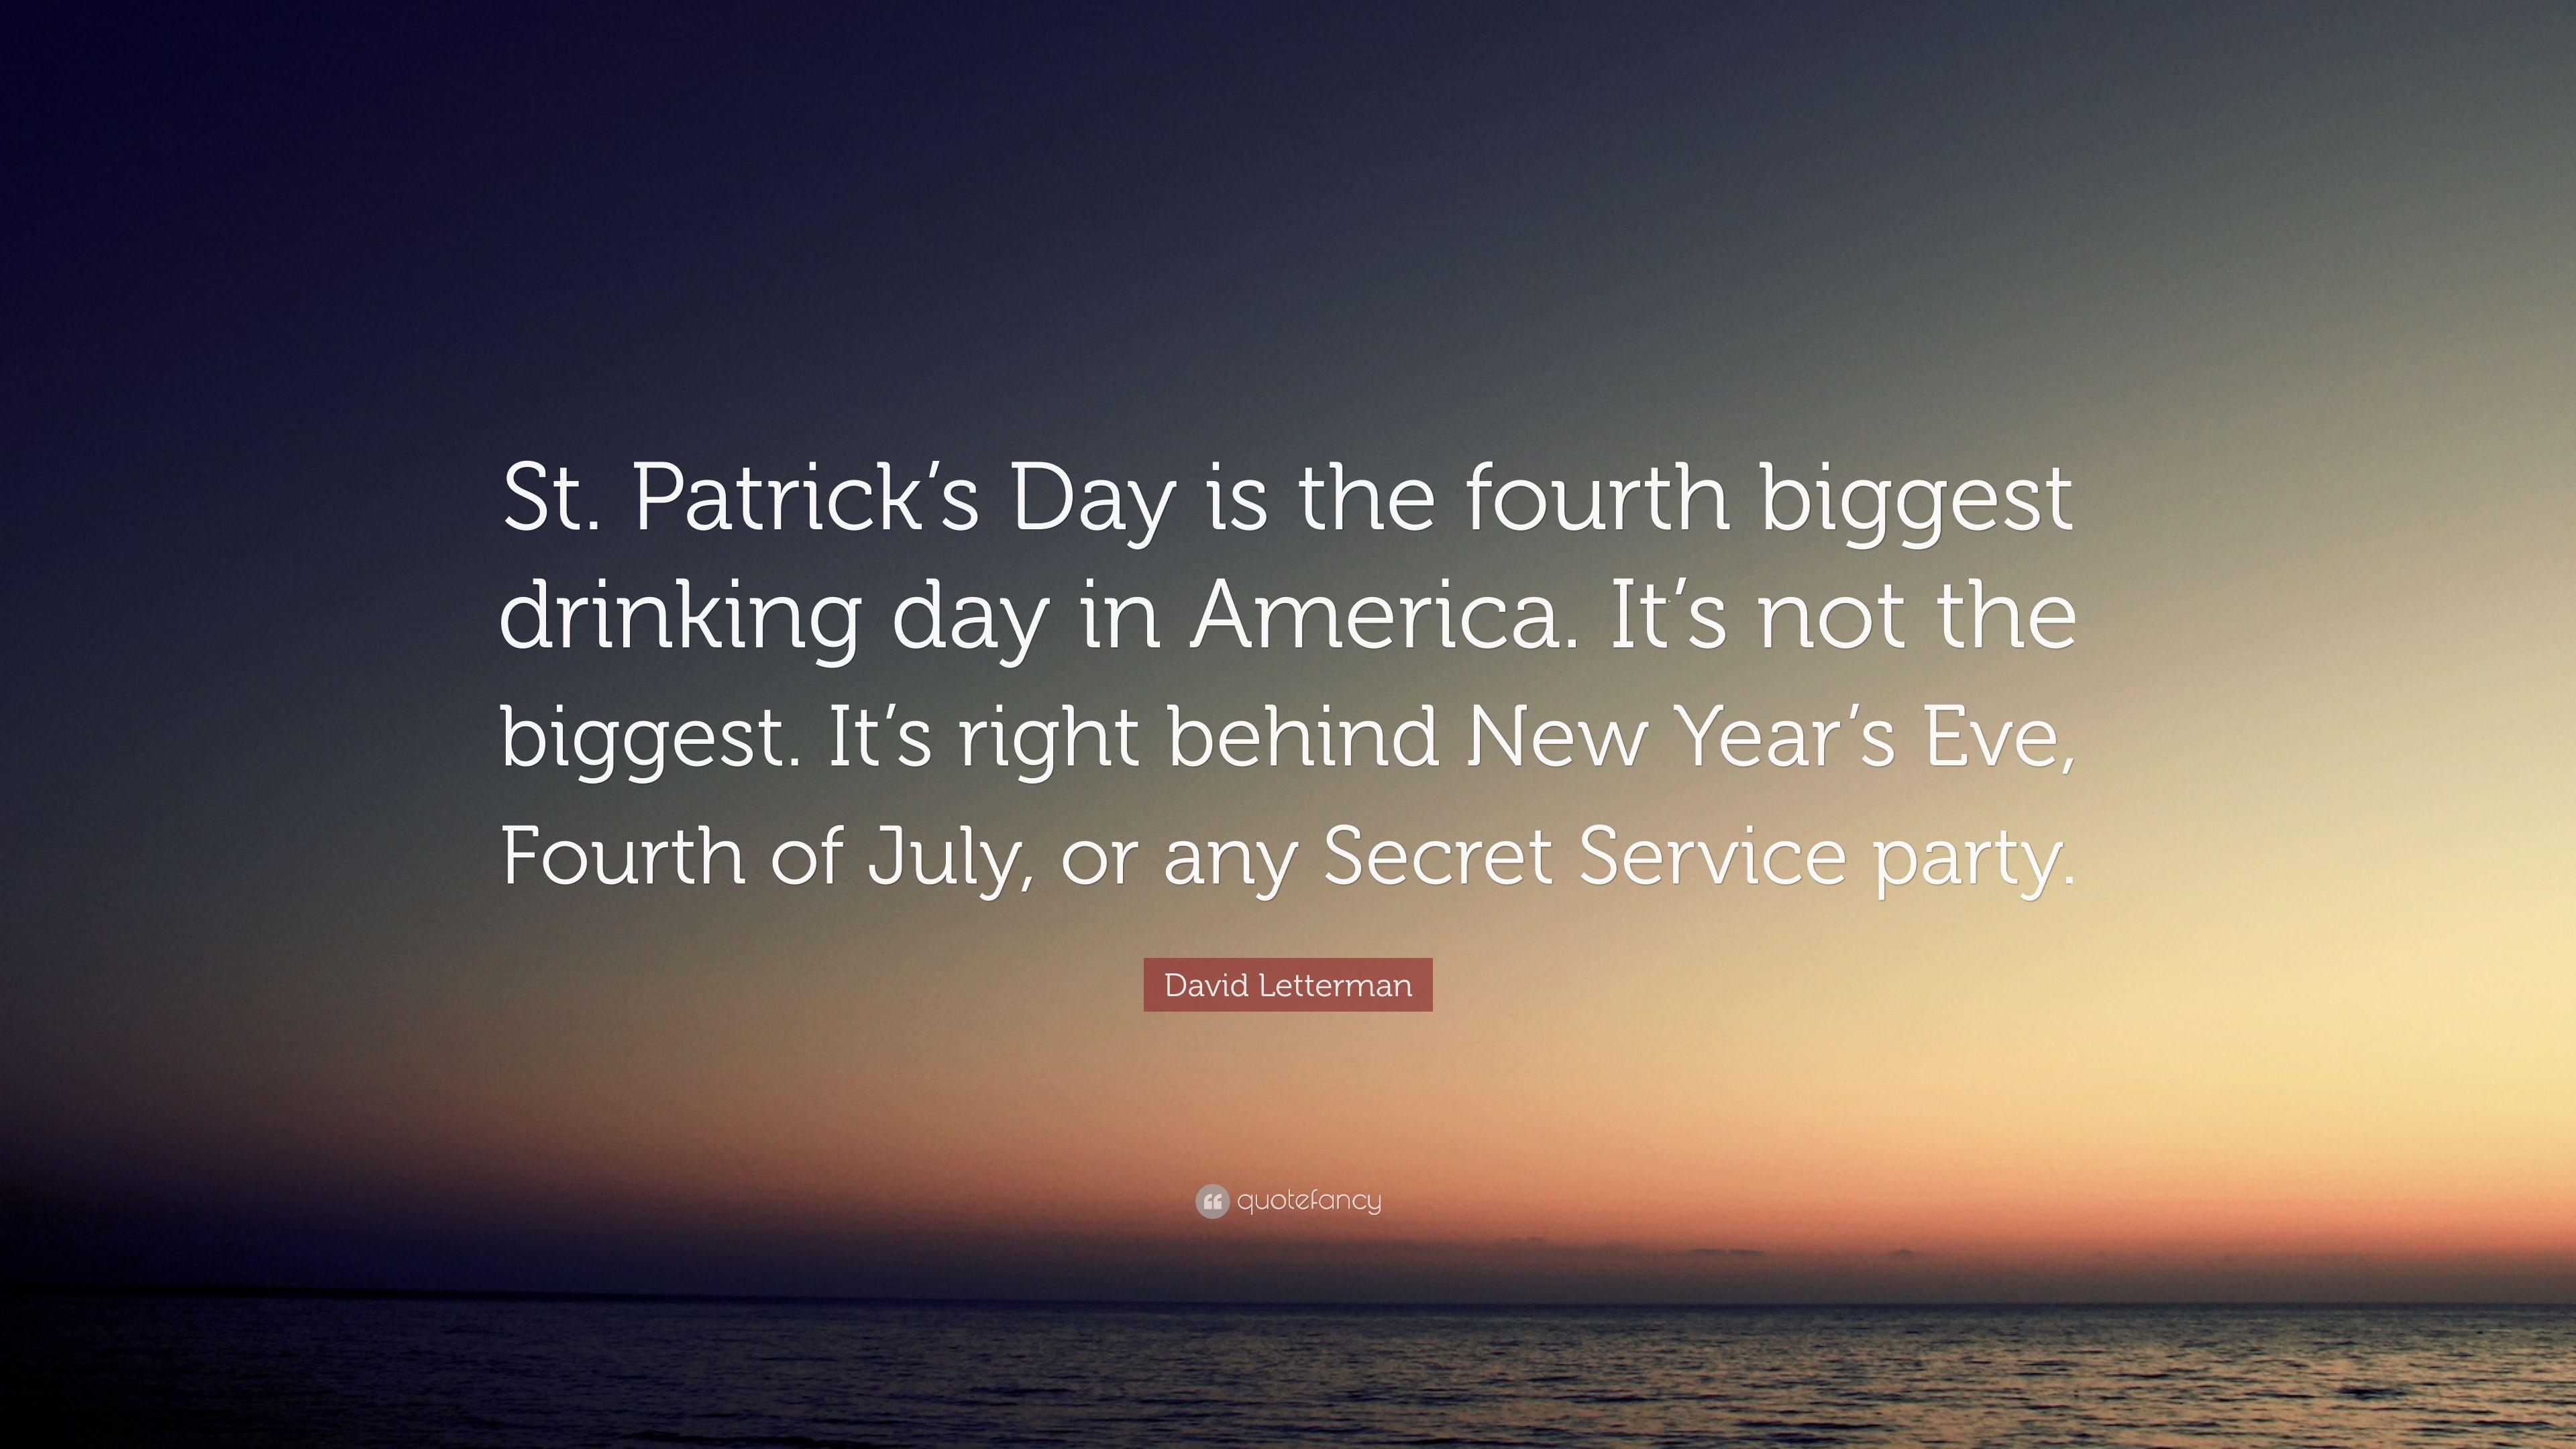 David Letterman Quote: “St. Patrick's Day is the fourth biggest